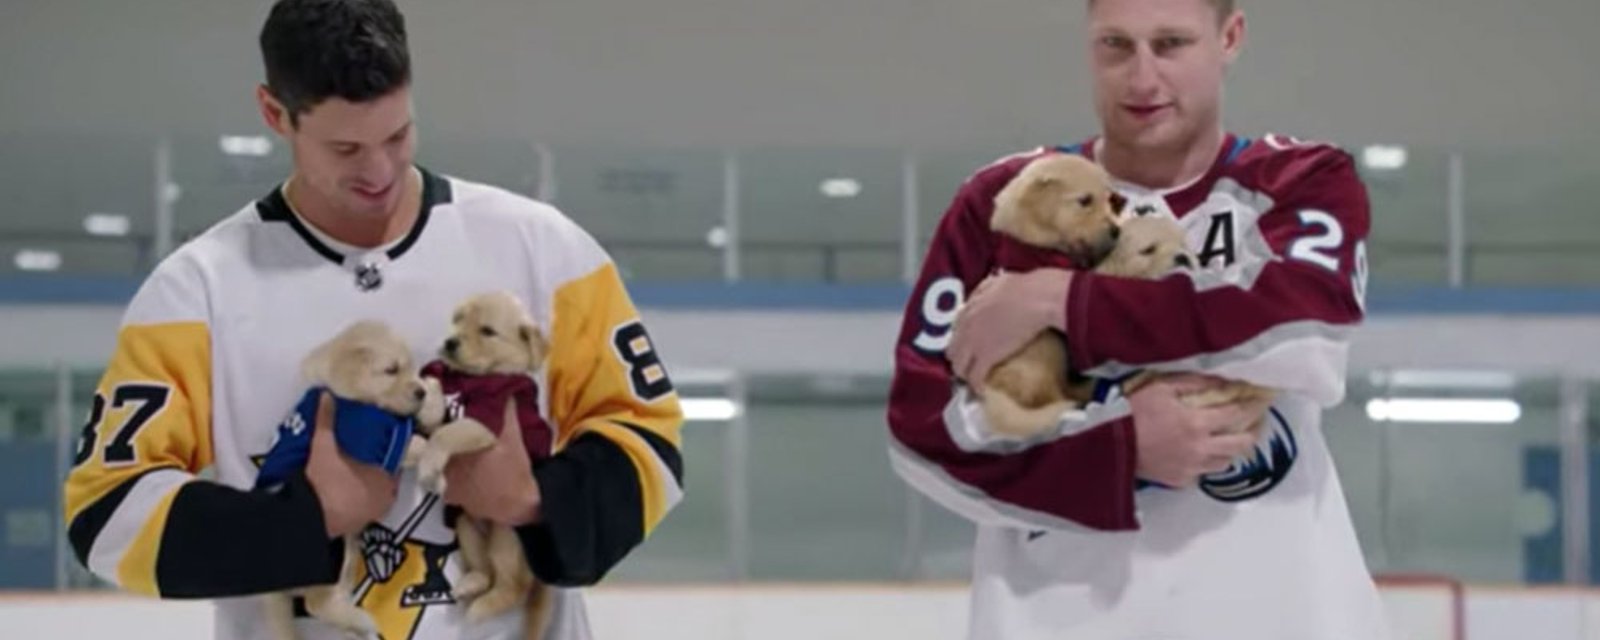 Crosby and MacKinnon take advice from Timbits kids on how to make hockey more fun